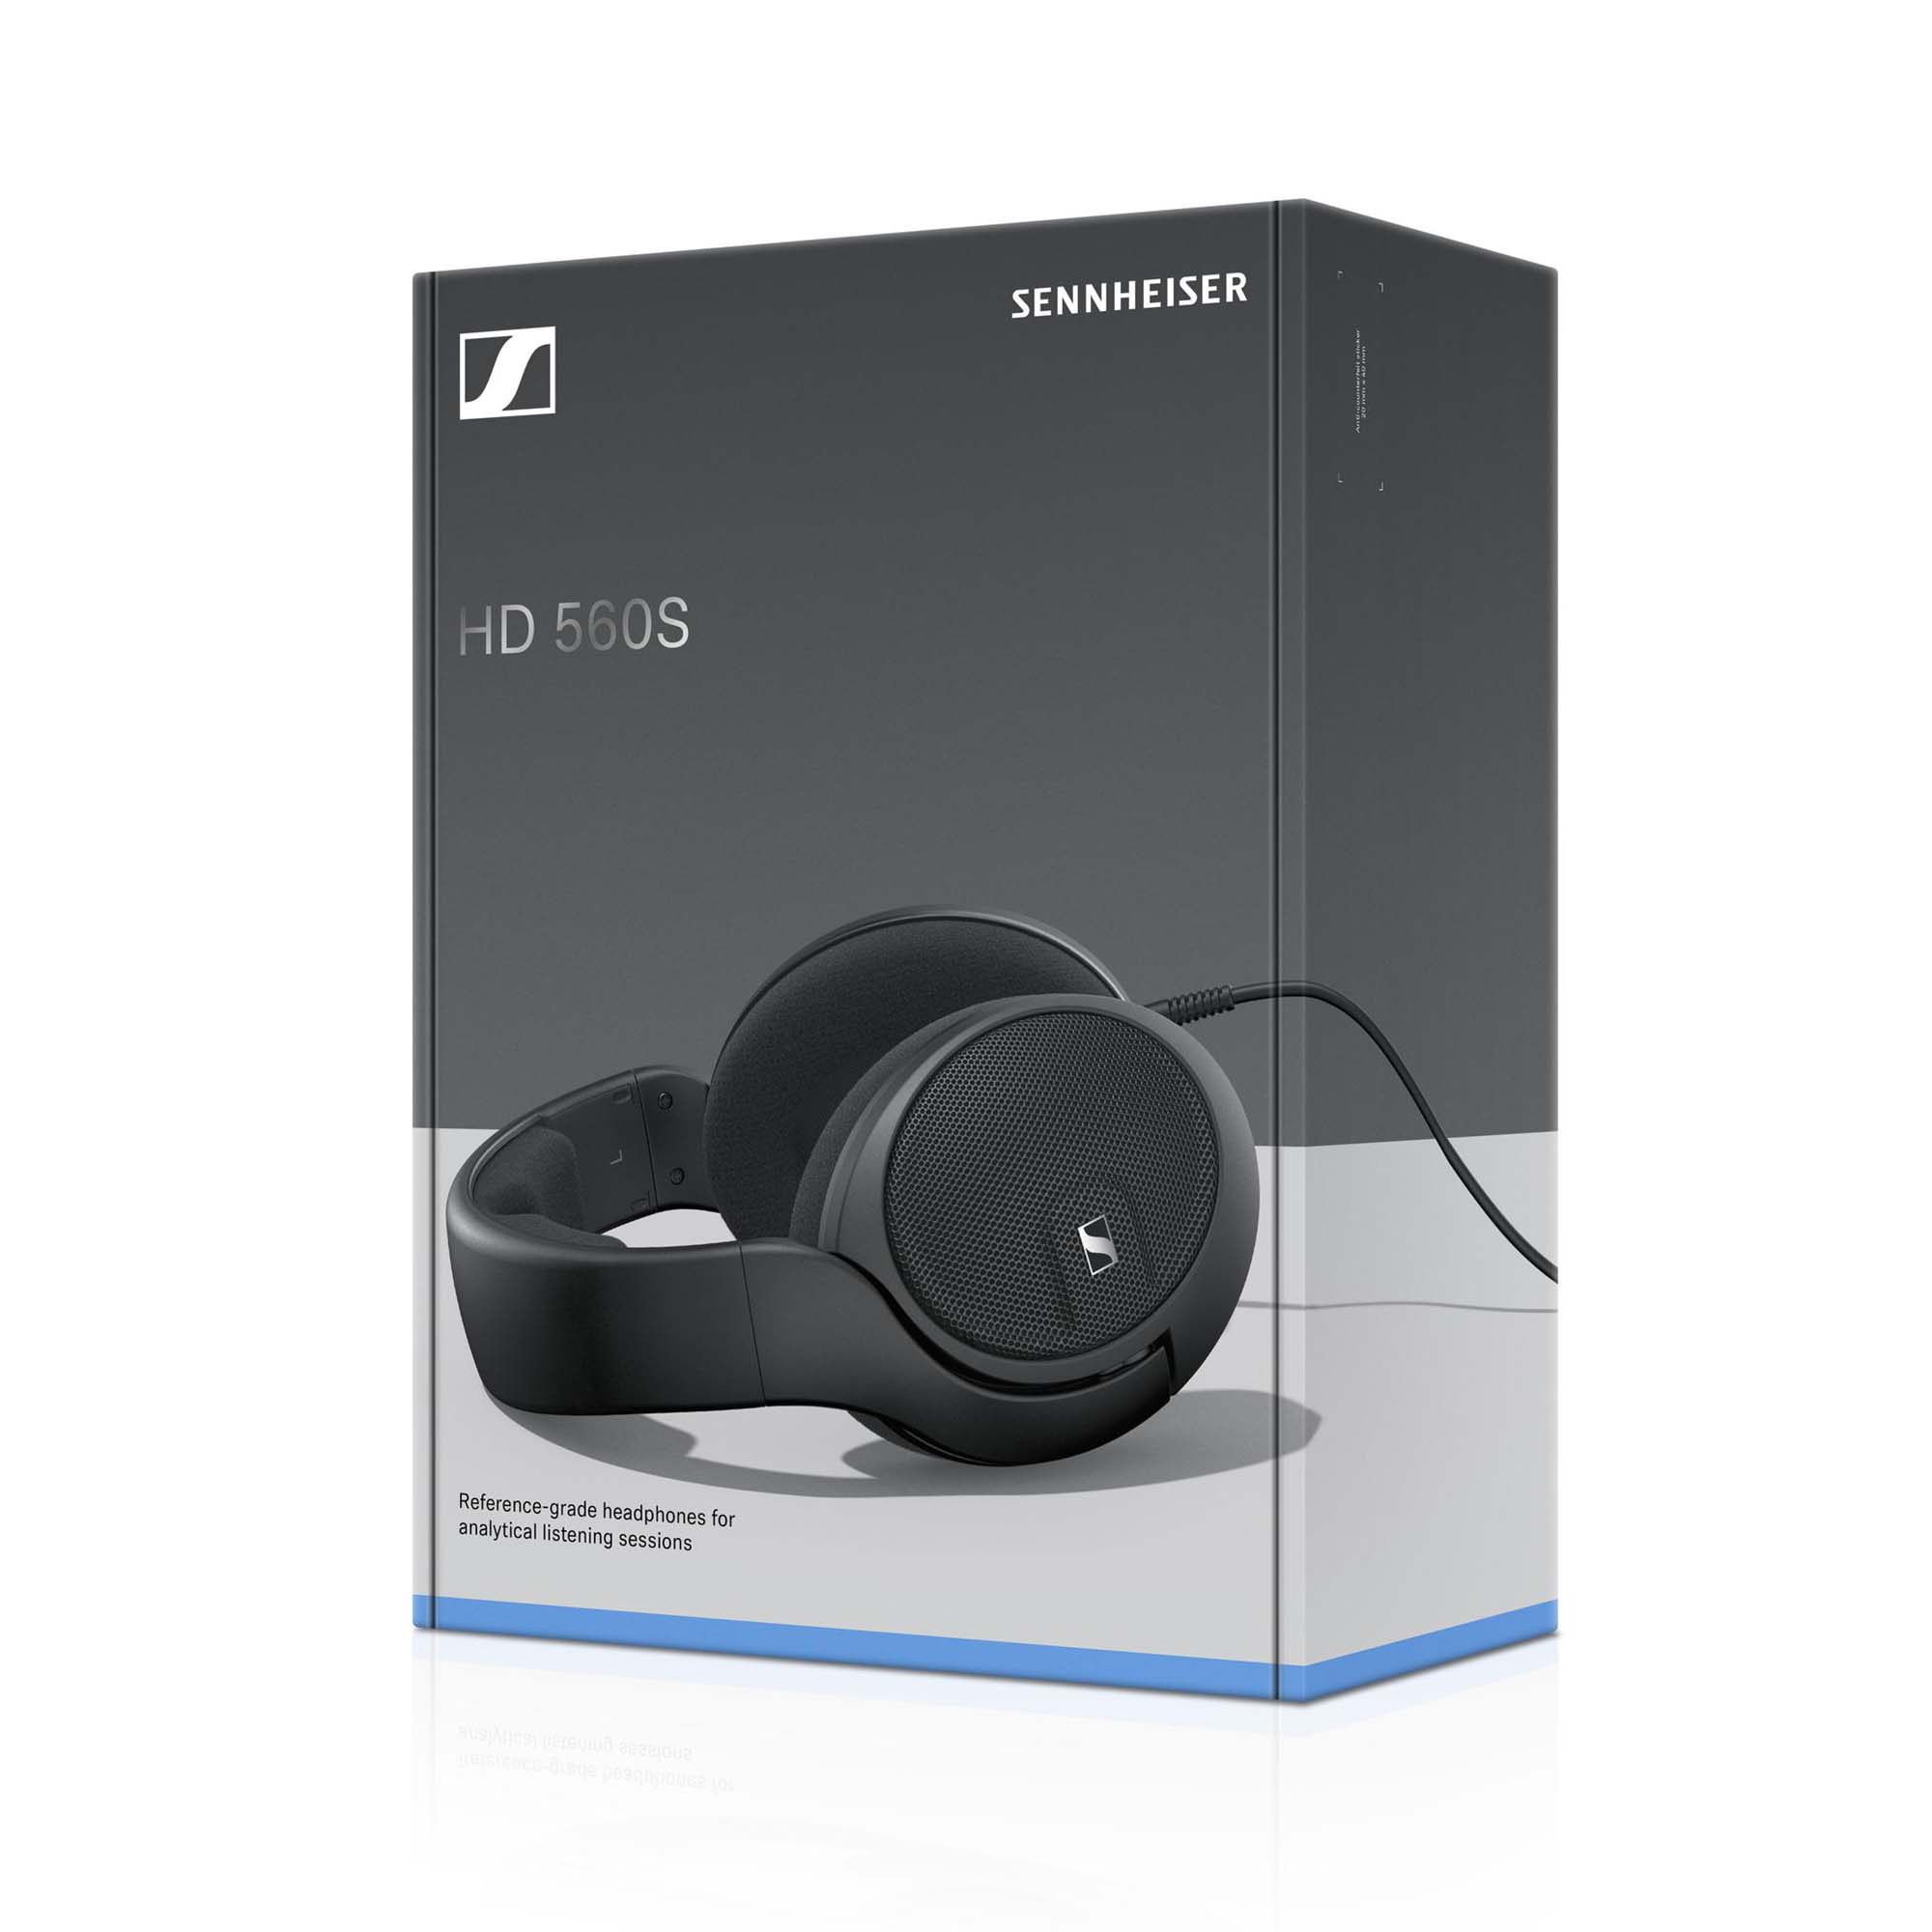 Sennheiser HD560S - unboxing & first impressions 